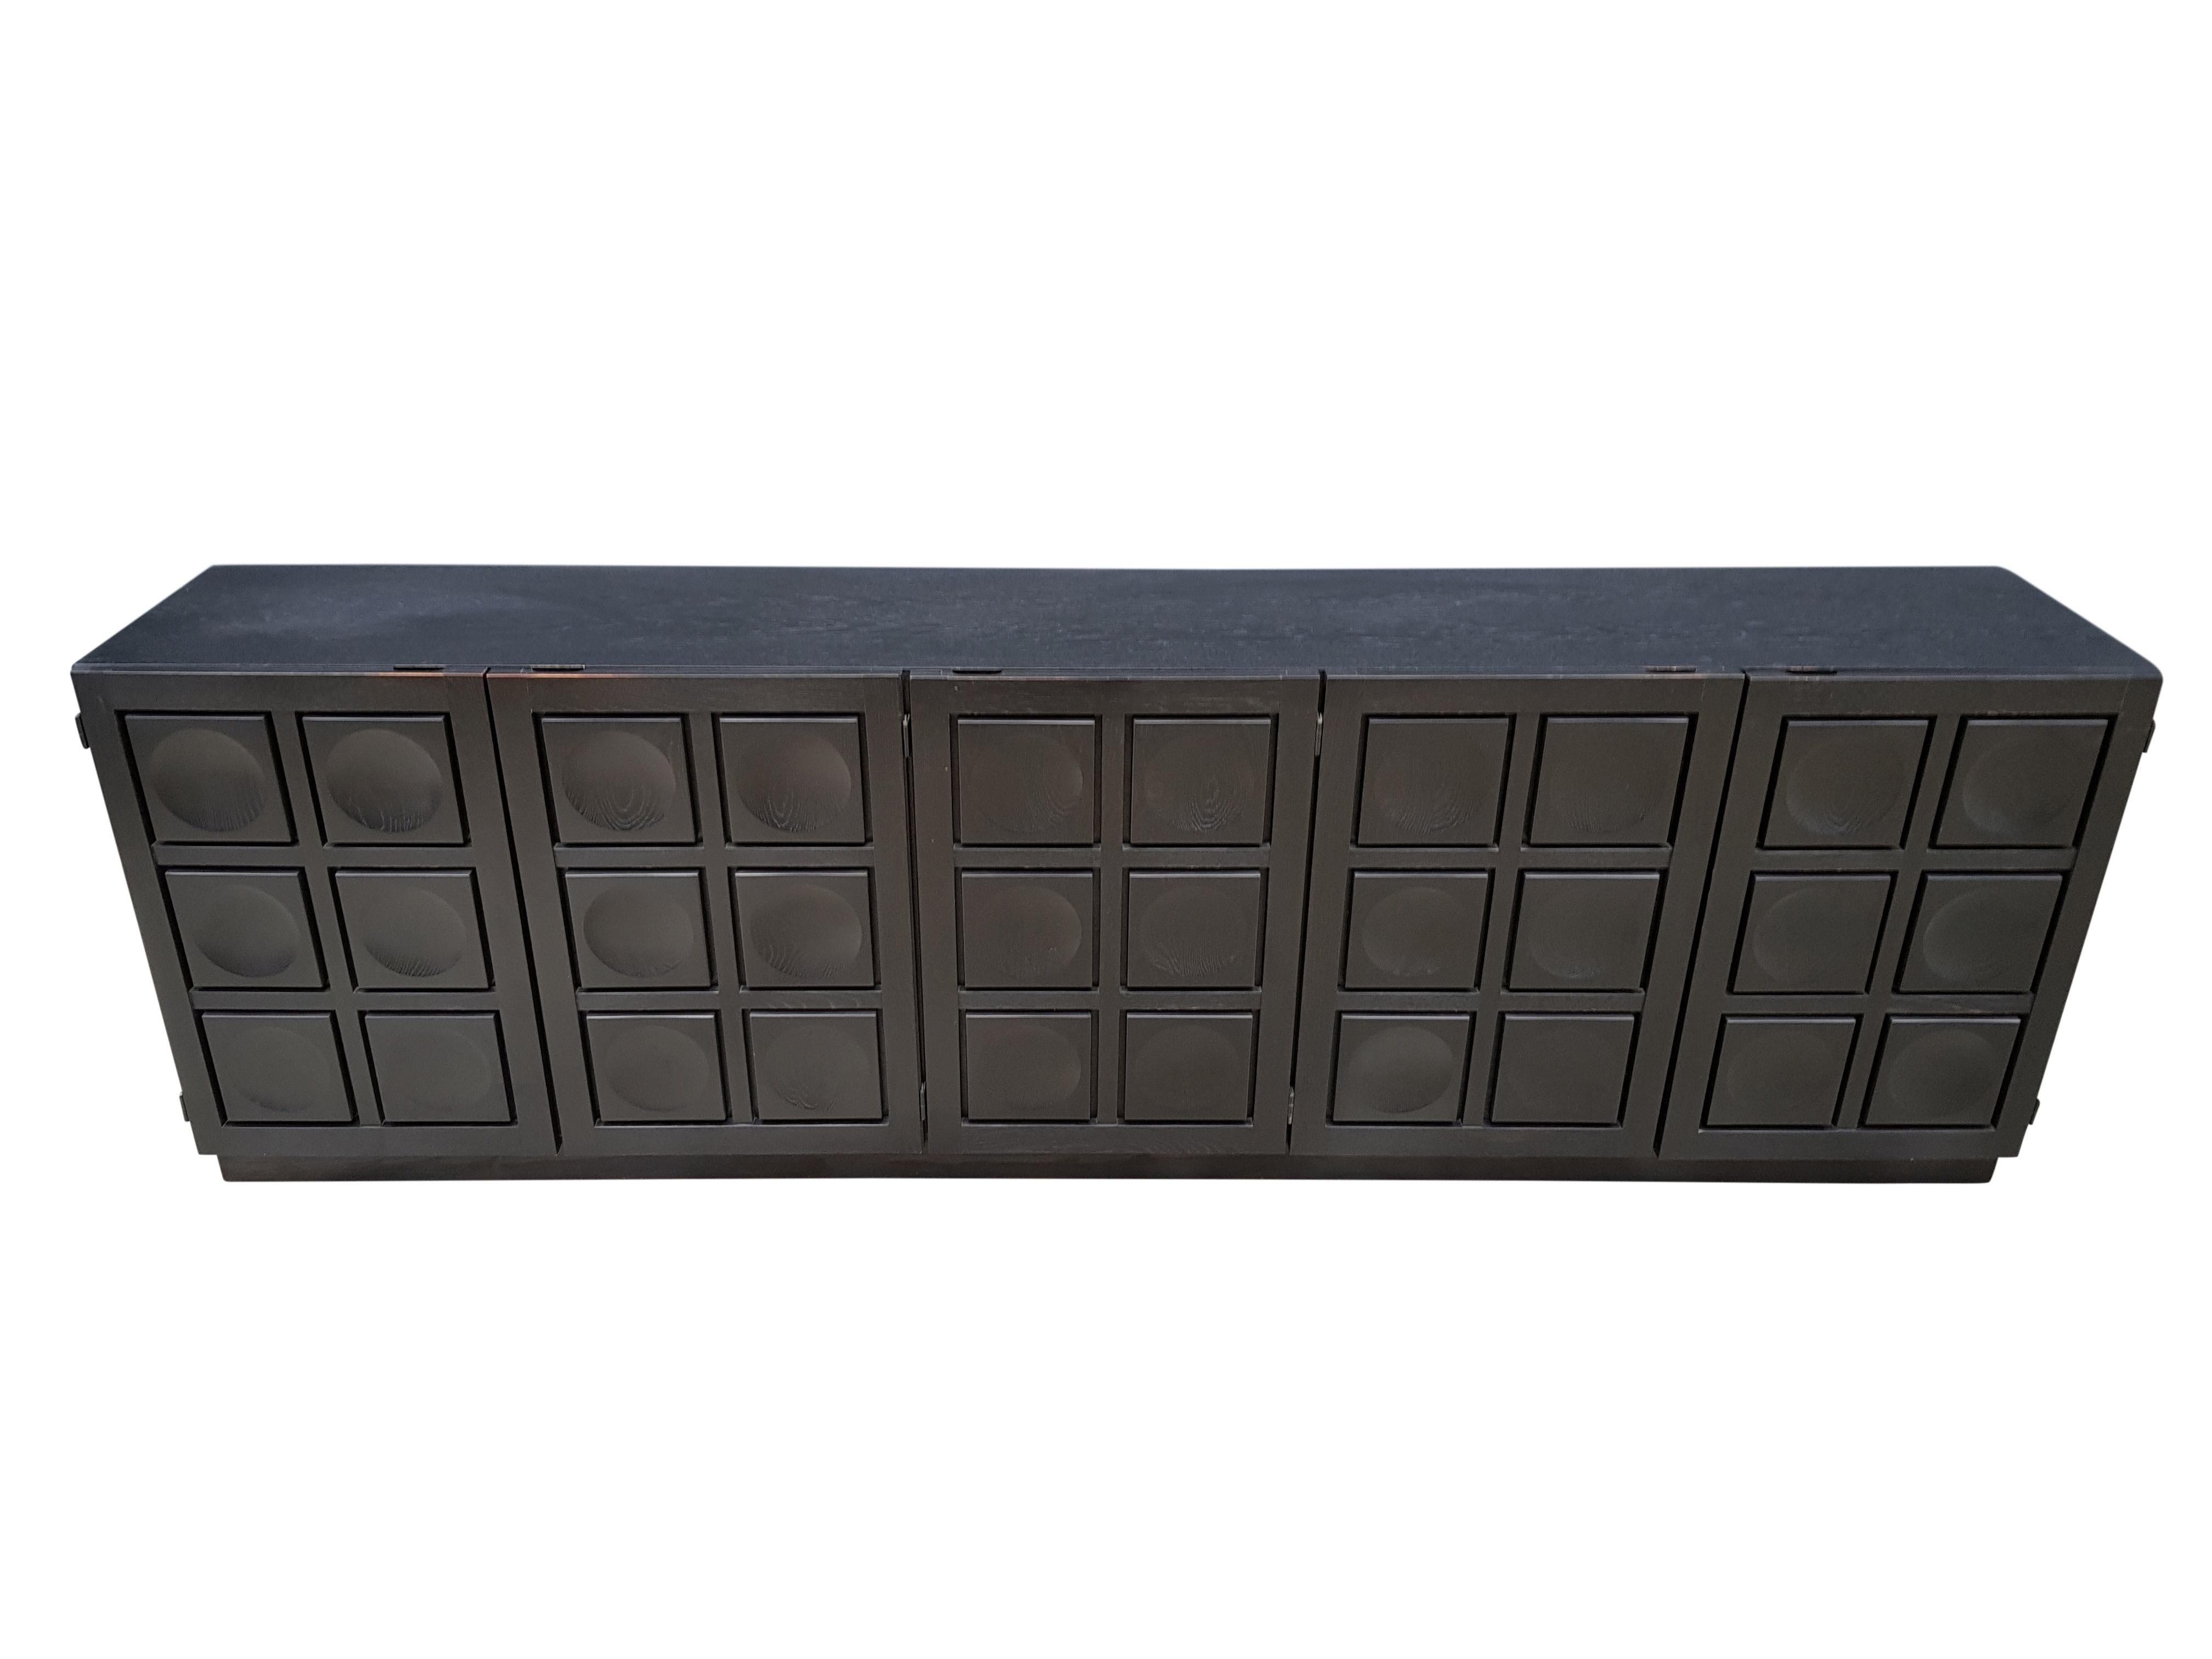 Belgian Ebonized Brutalist Credenza by the Coene For Sale